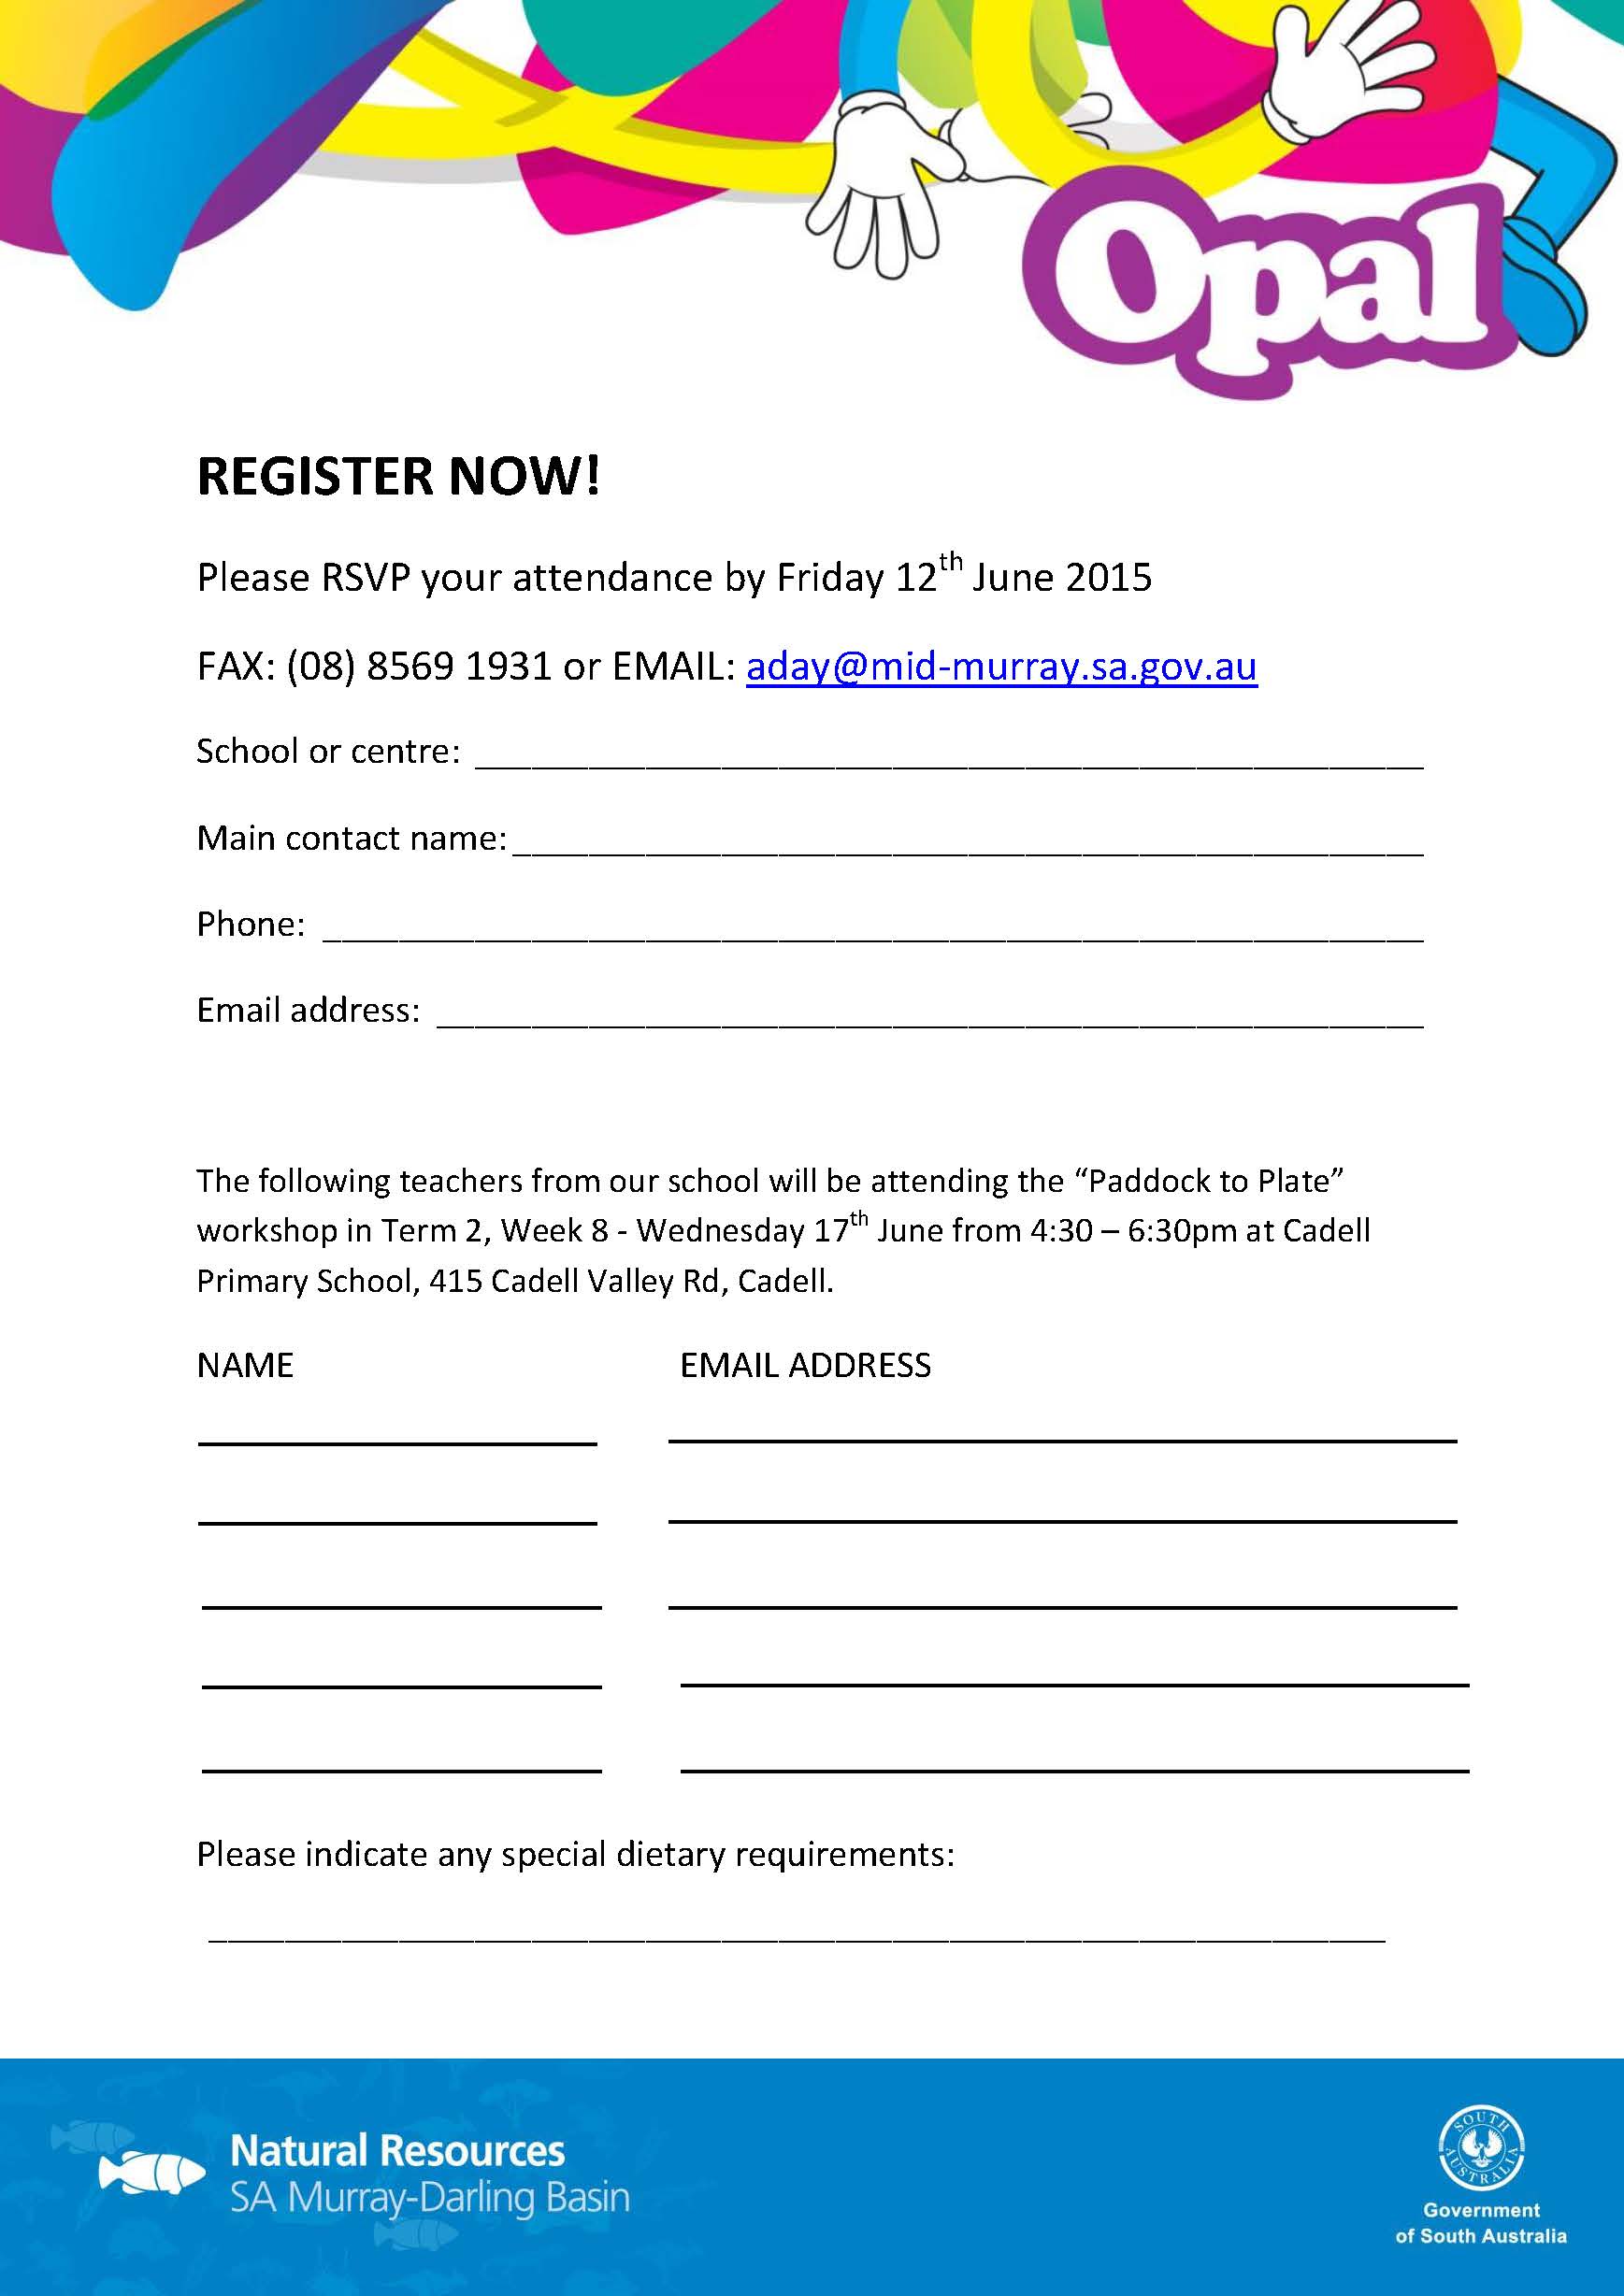 Paddock to Plate registration form